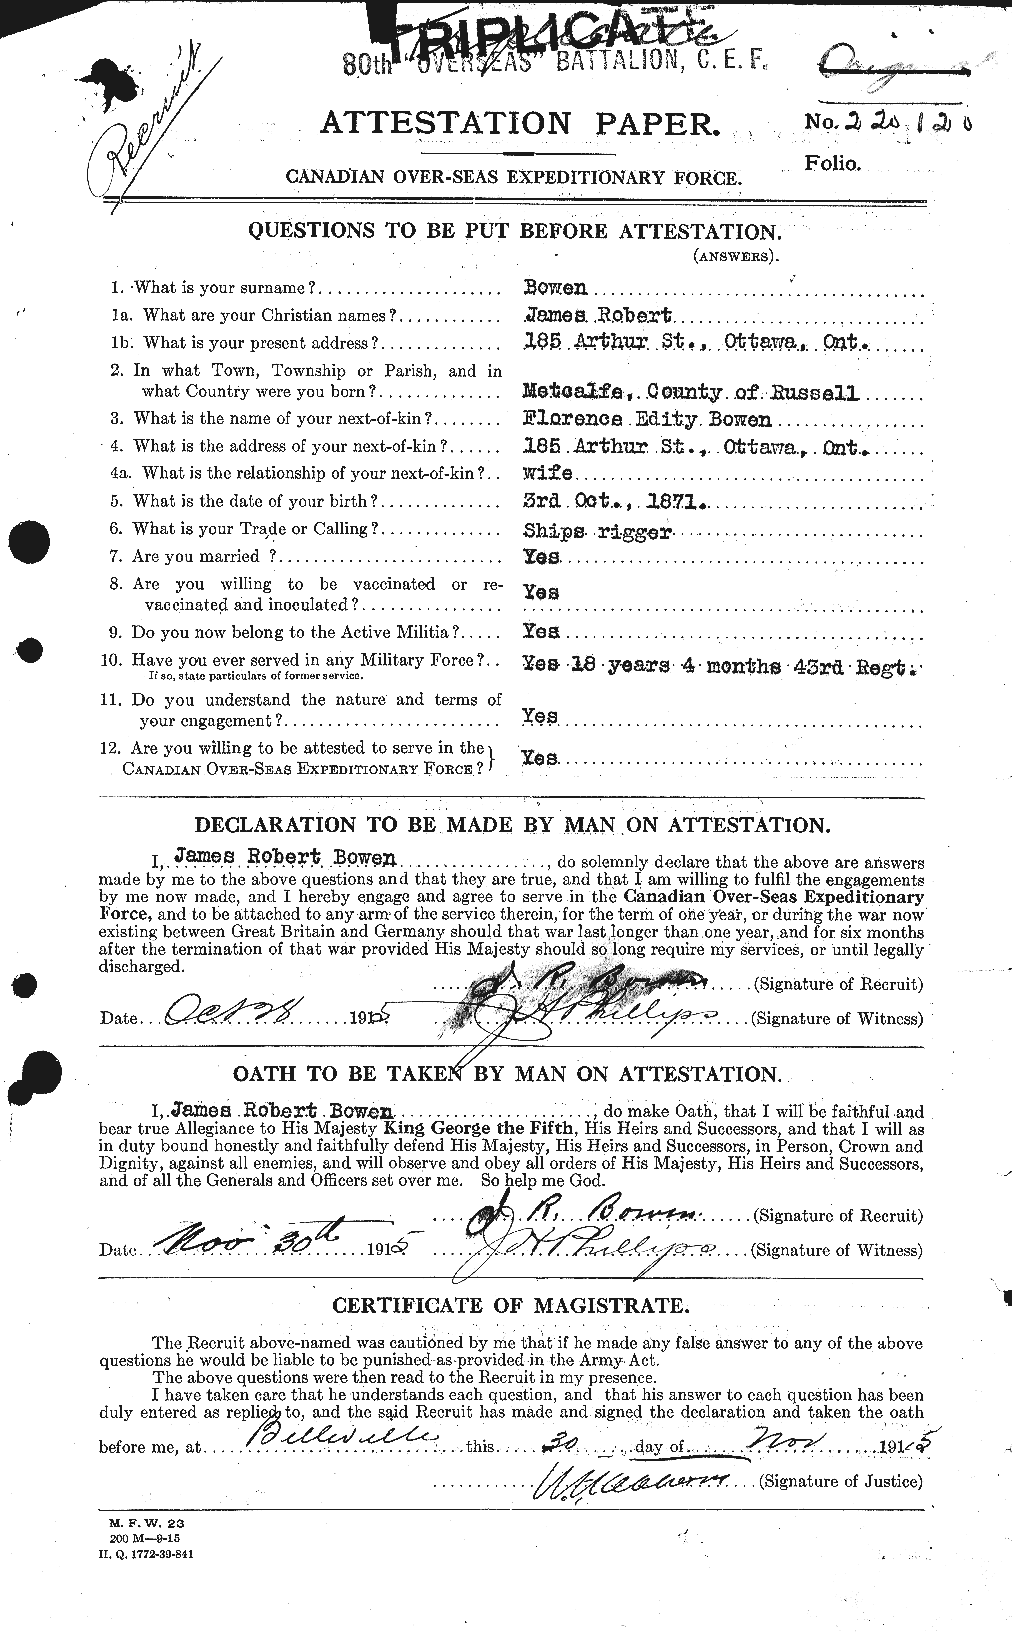 Personnel Records of the First World War - CEF 255429a